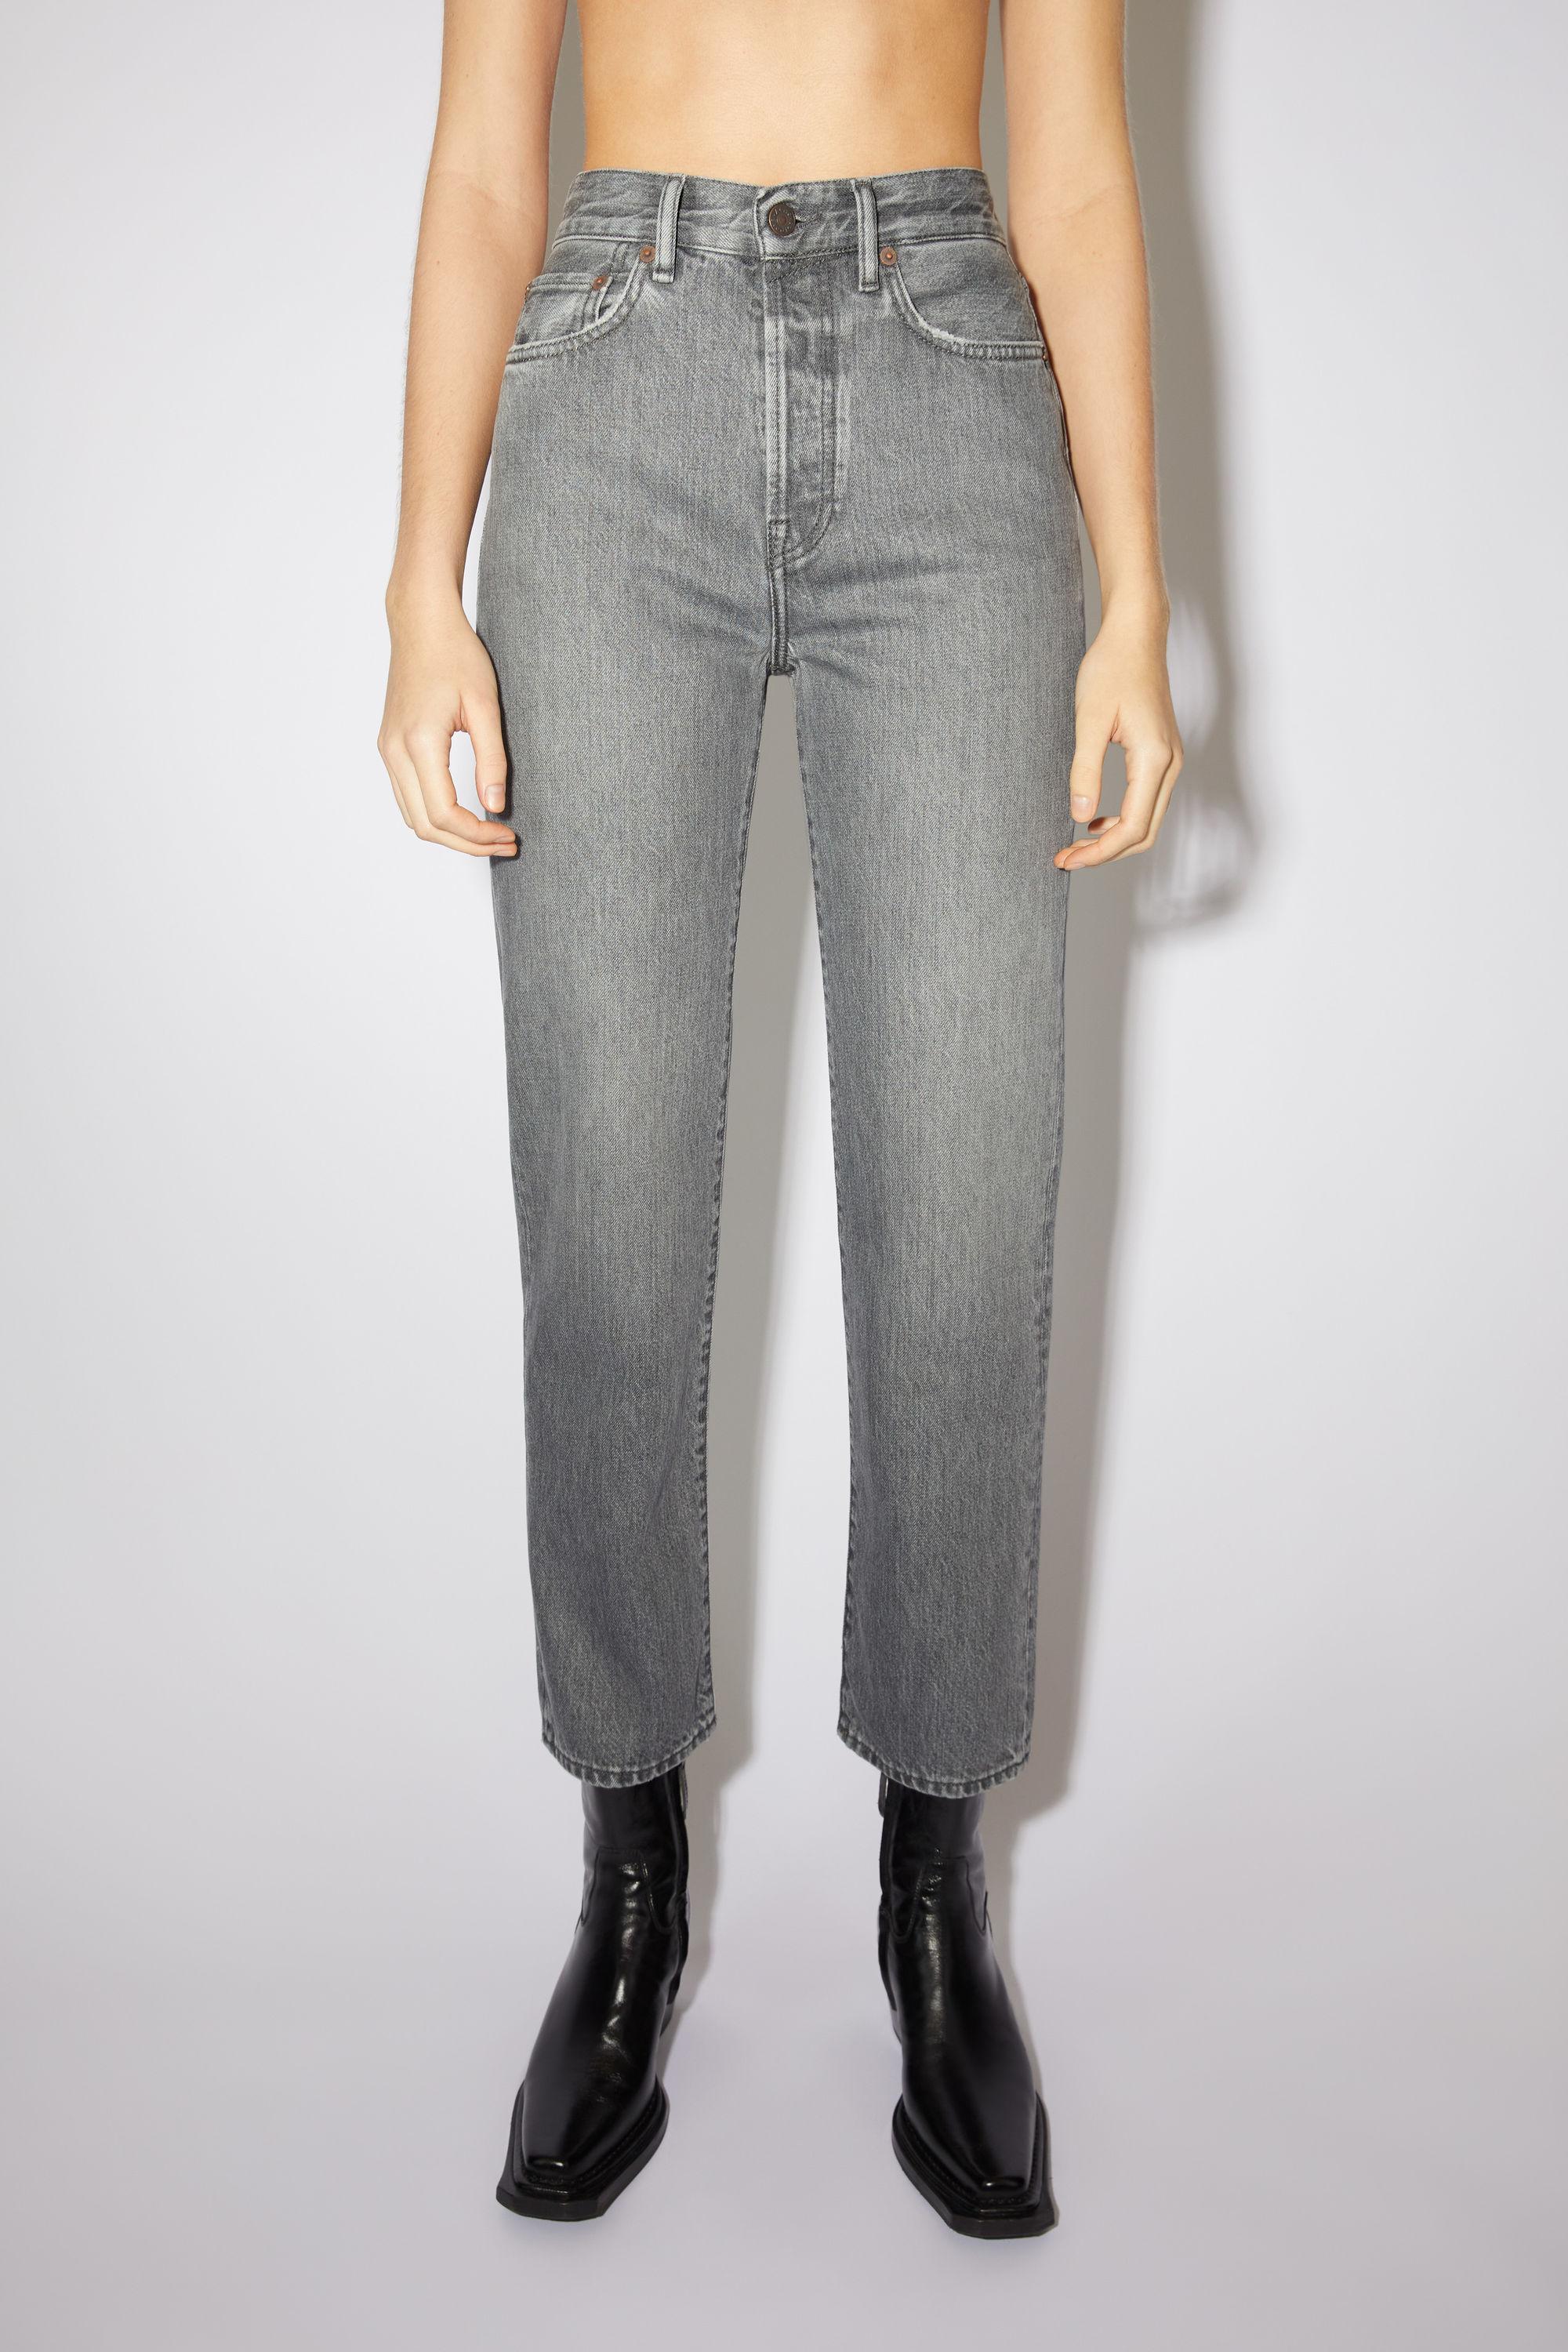 Acne Studios Straight Fit Jeans in Gray | Lyst